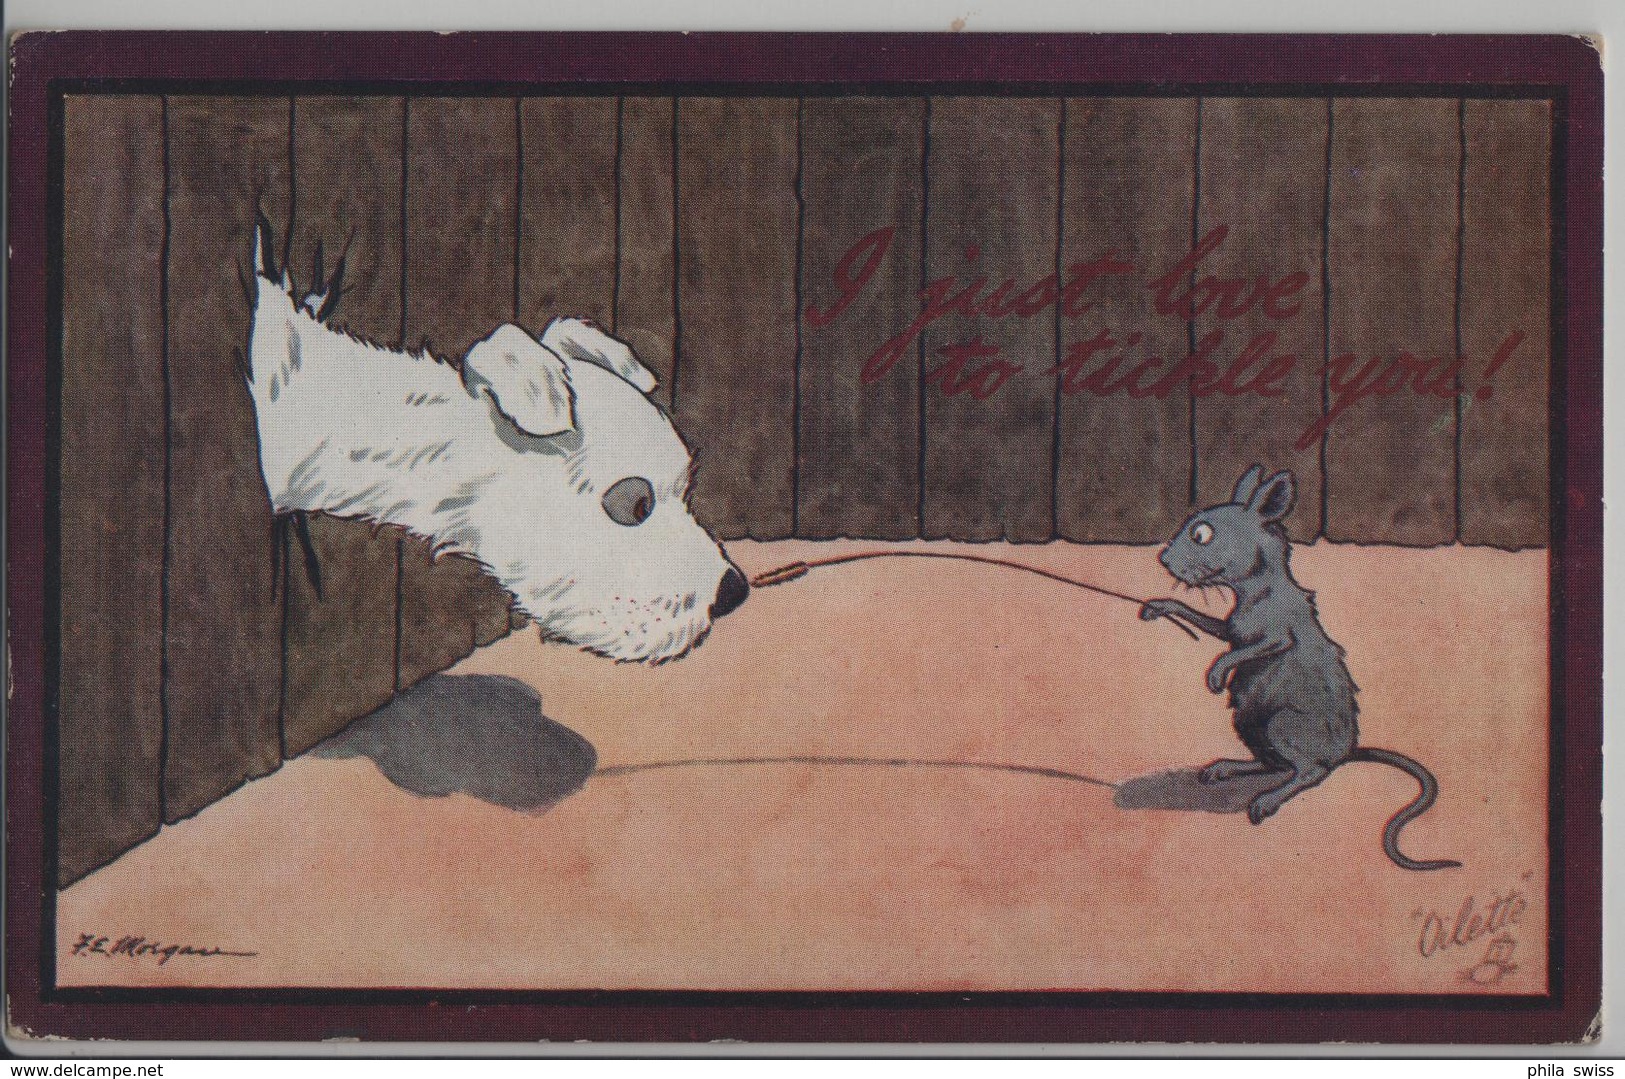 Some Dog "Oilette" I Just Love To Tickle You - Dog & Mouse Hund & Maus - Tuck's Post Card No. 8866 - Tuck, Raphael